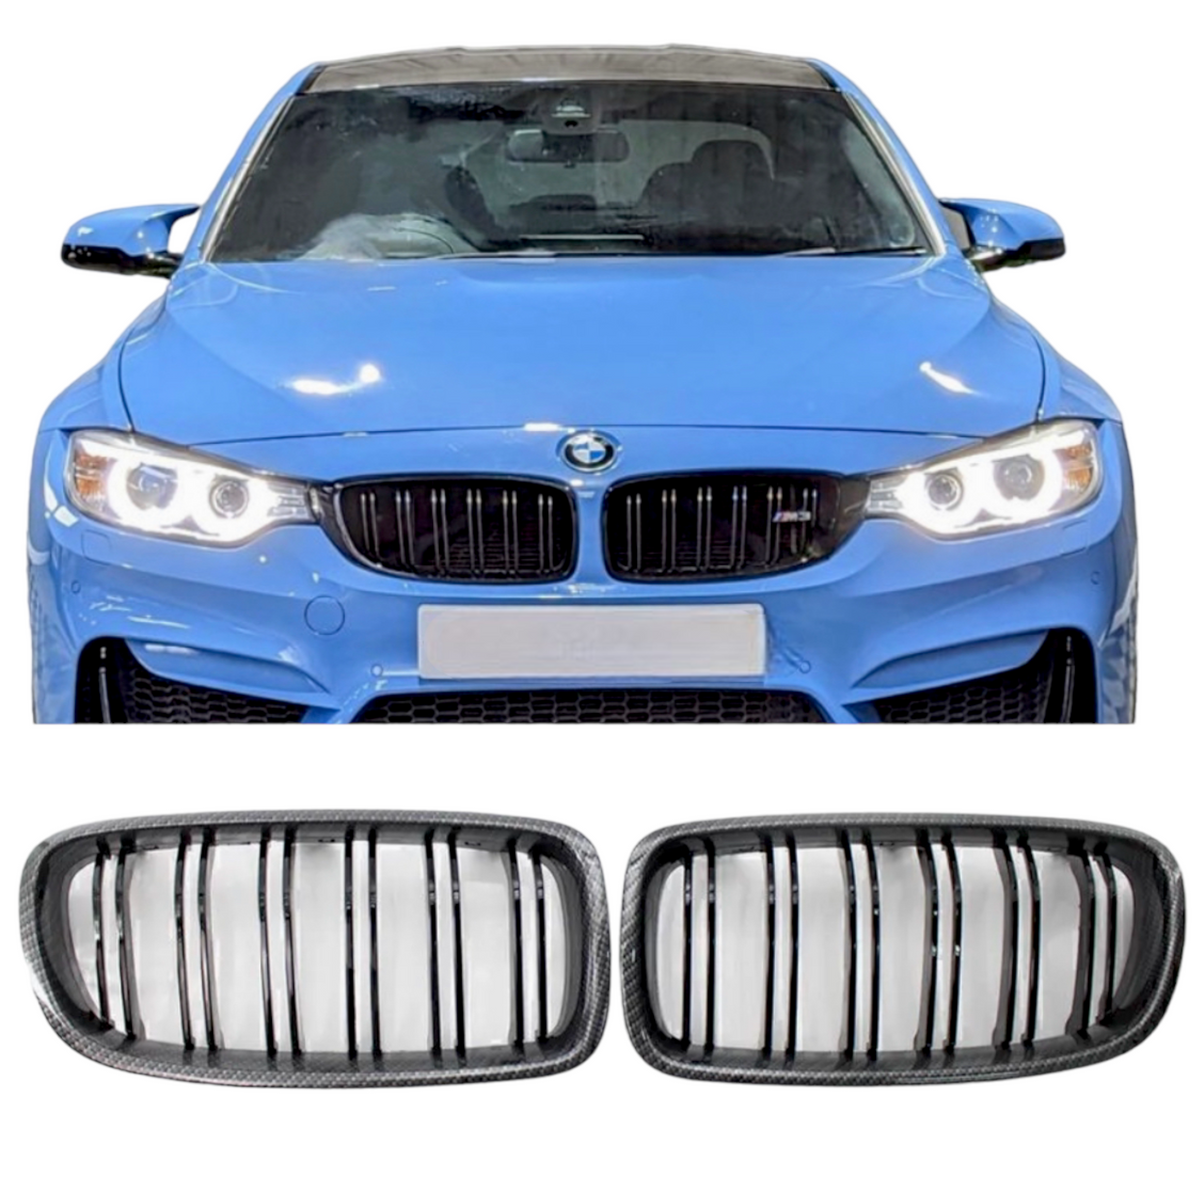 Front Grille - Fits BMW F30 F31 3 Series - M3 Sport - Carbon Look